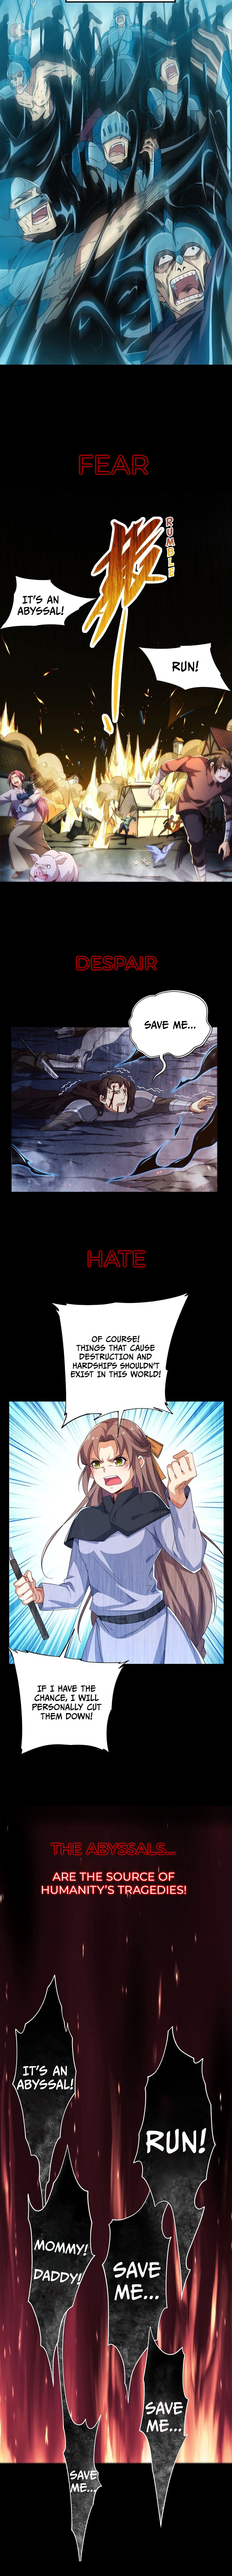 Despite Coming From The Abyss, I Will Save Humanity - Page 2